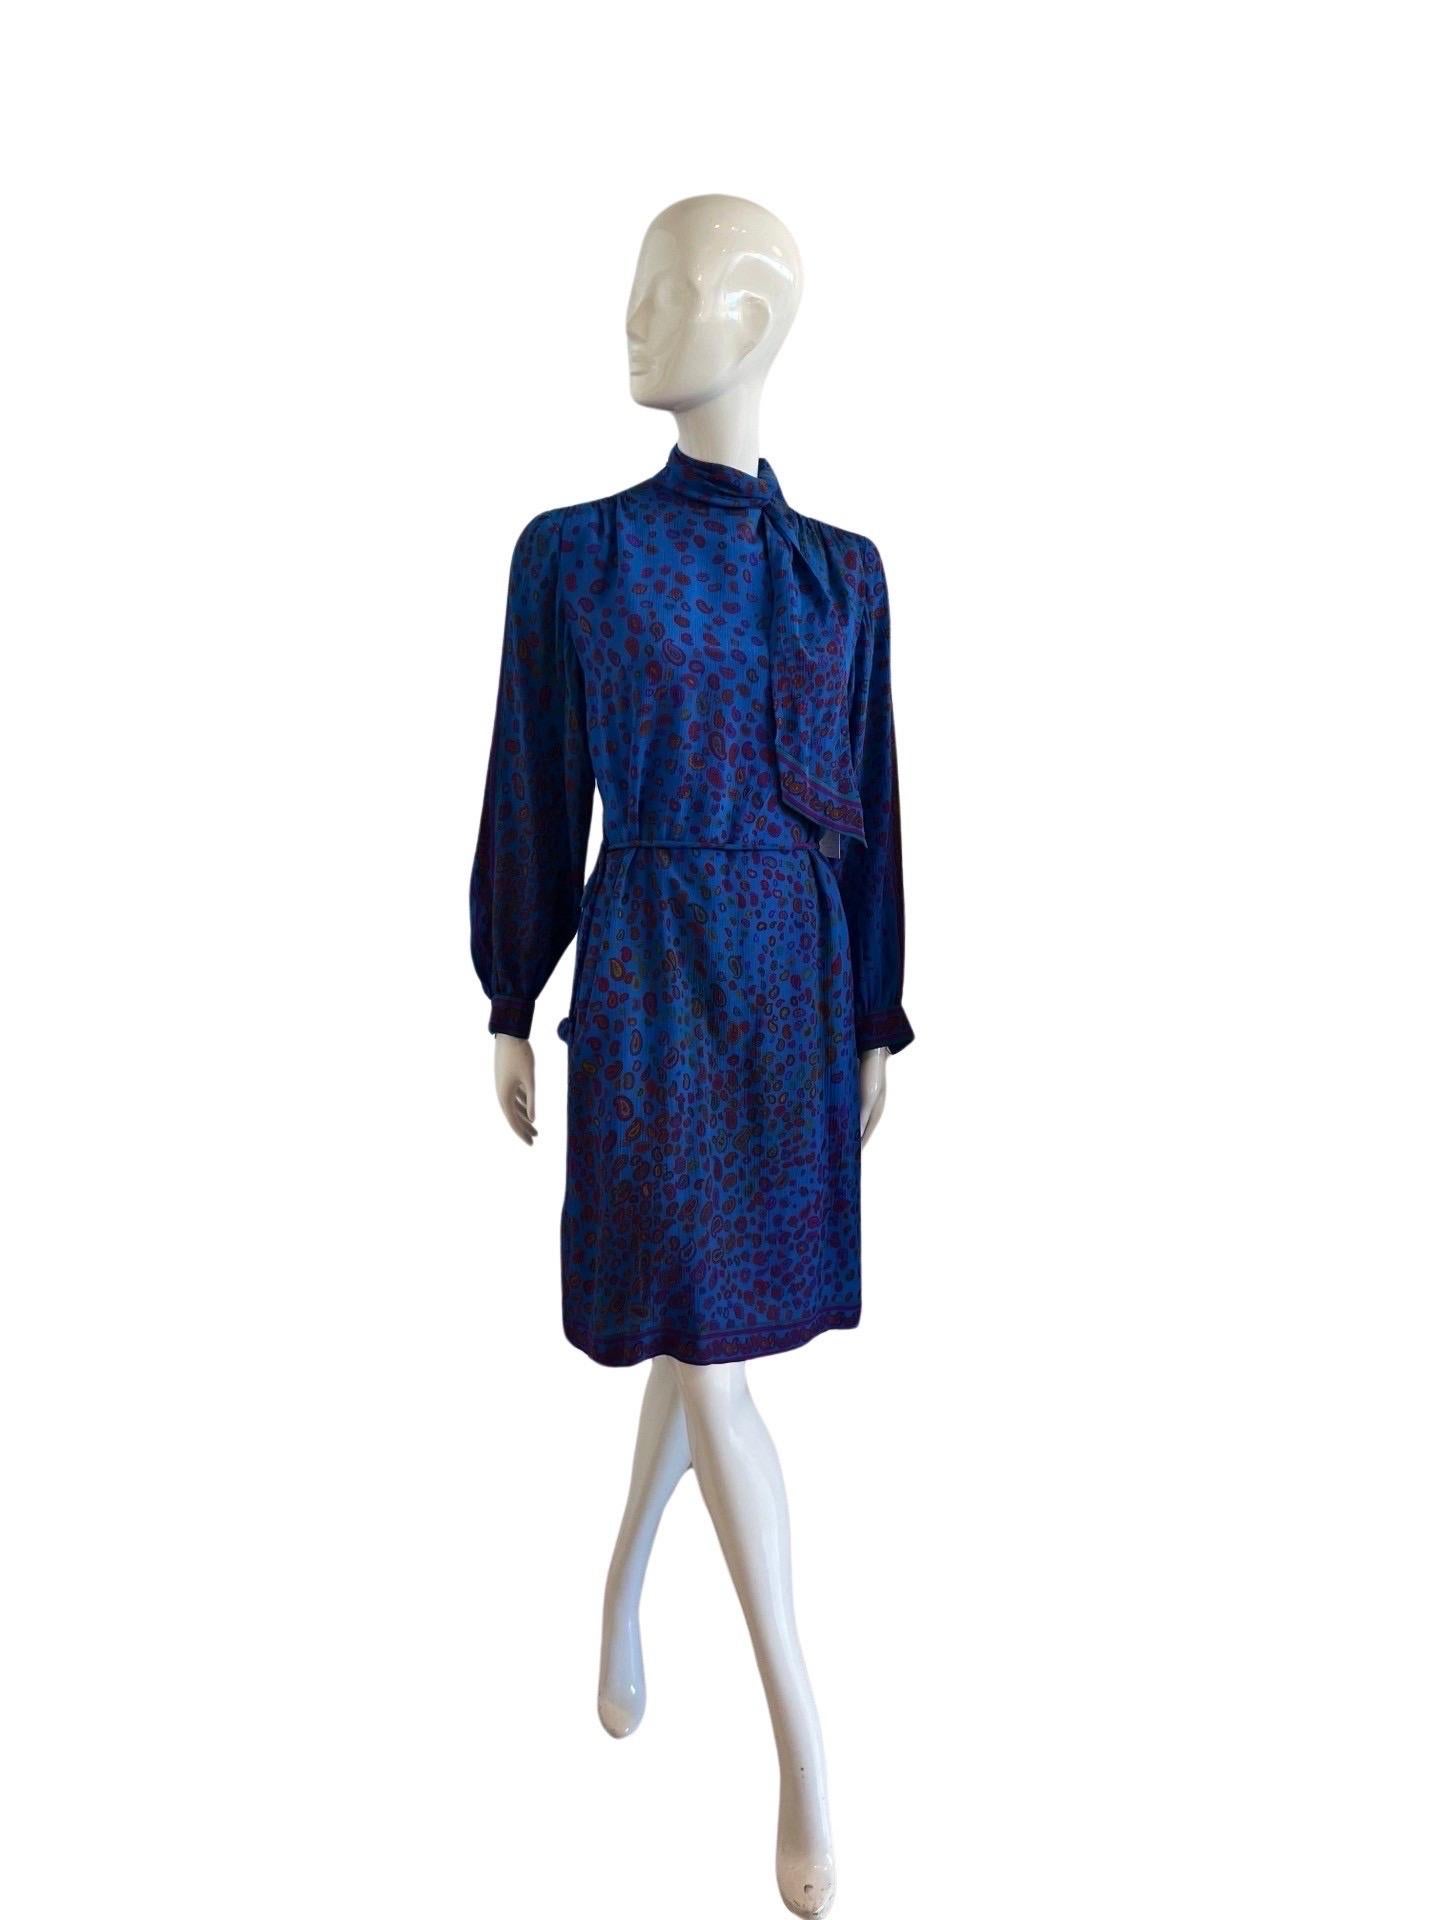 Stunning 1970's Leonard Paris Studio line in an electric deep blue on crepe silk with a fuscia and burgundy paisley print.  The dress has a high collar  and an attached scarf piece to be tied at the side of the neck.  The dress zips down the back. 